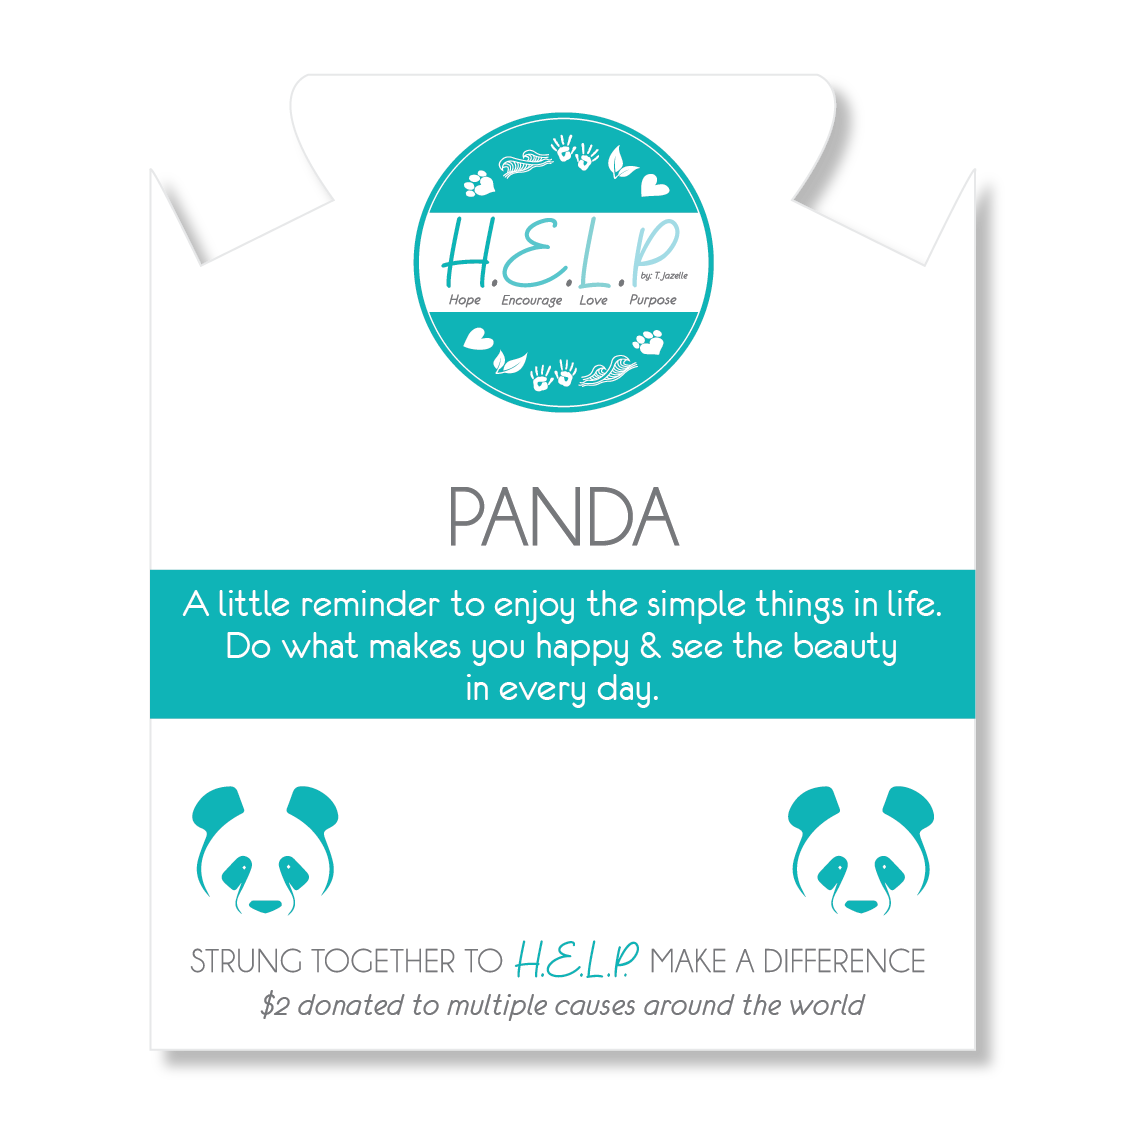 HELP by TJ Panda Charm with Hot Pink Jade Beads Charity Bracelet